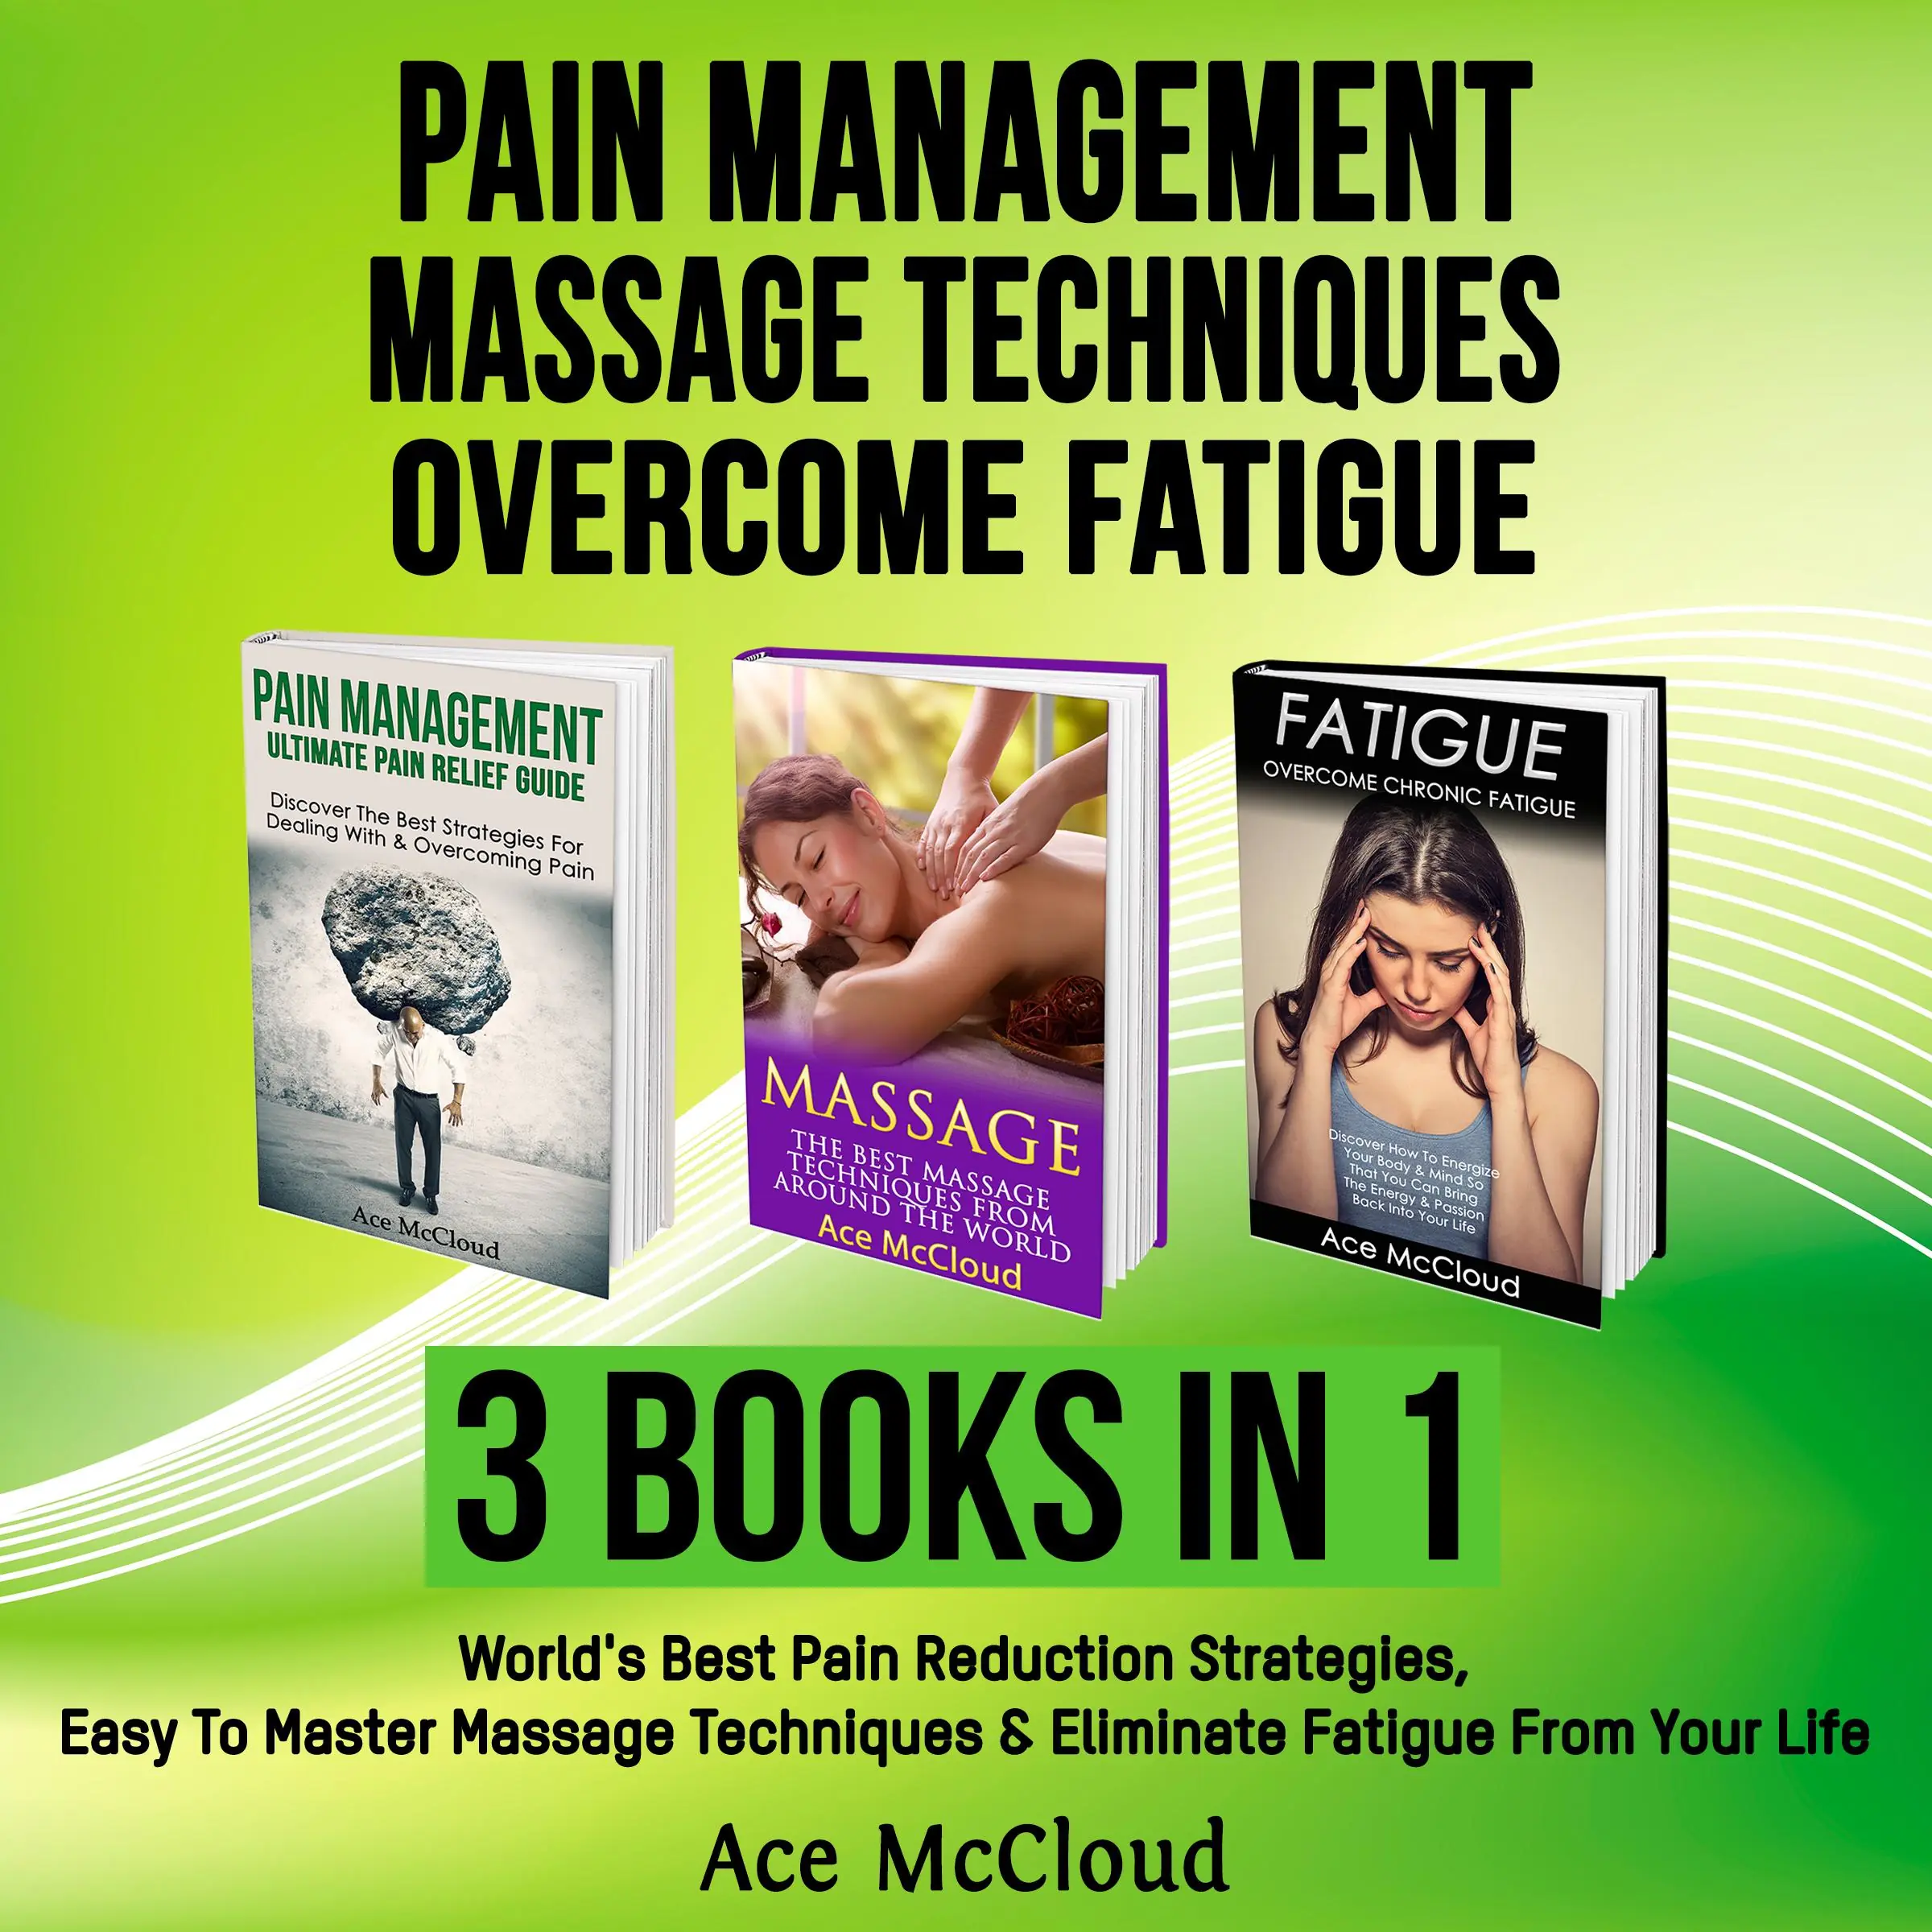 Pain Management: Massage Techniques: Overcome Fatigue: 3 Books in 1: World's Best Pain Reduction Strategies, Easy To Master Massage Techniques & Eliminate Fatigue From Your Life Audiobook by Ace McCloud